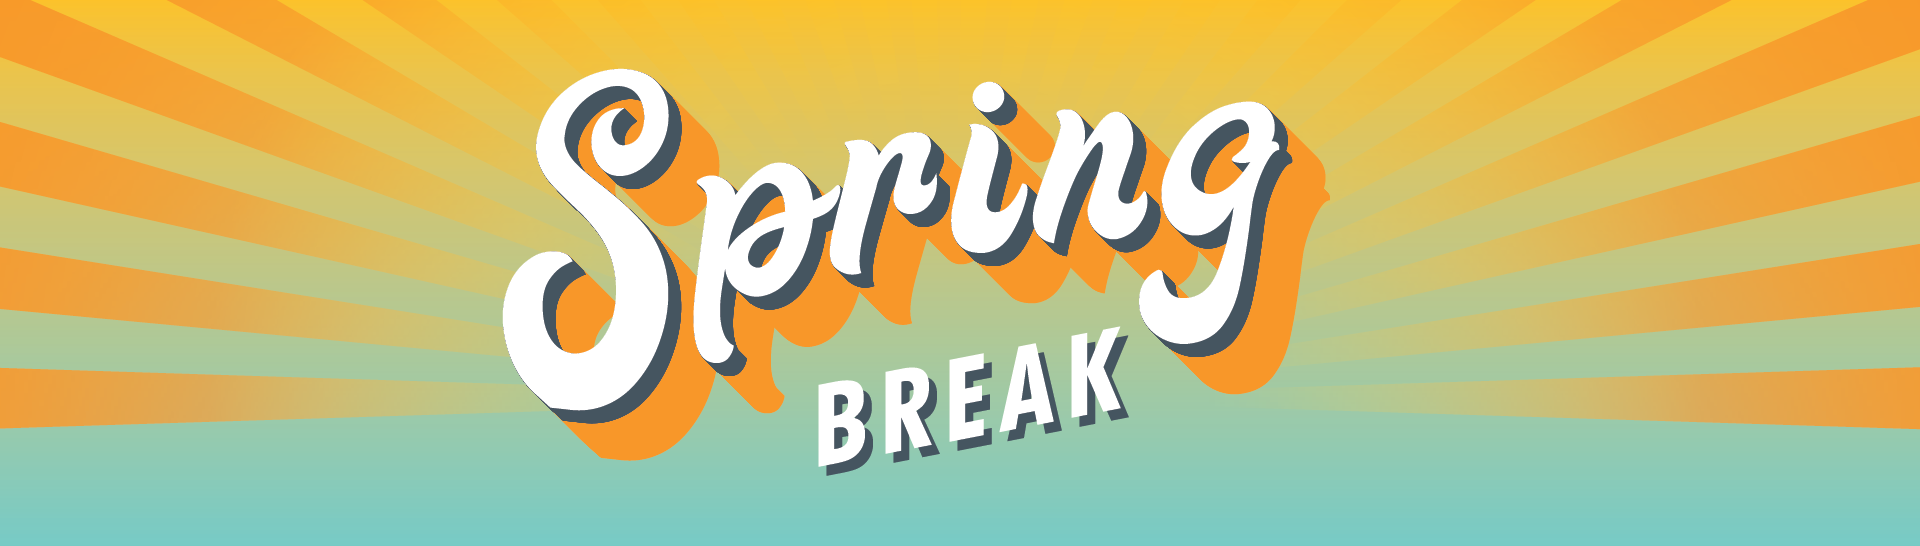 UPDATED SPRING BREAK Friday March 20 And Monday March 23 To Friday March 27